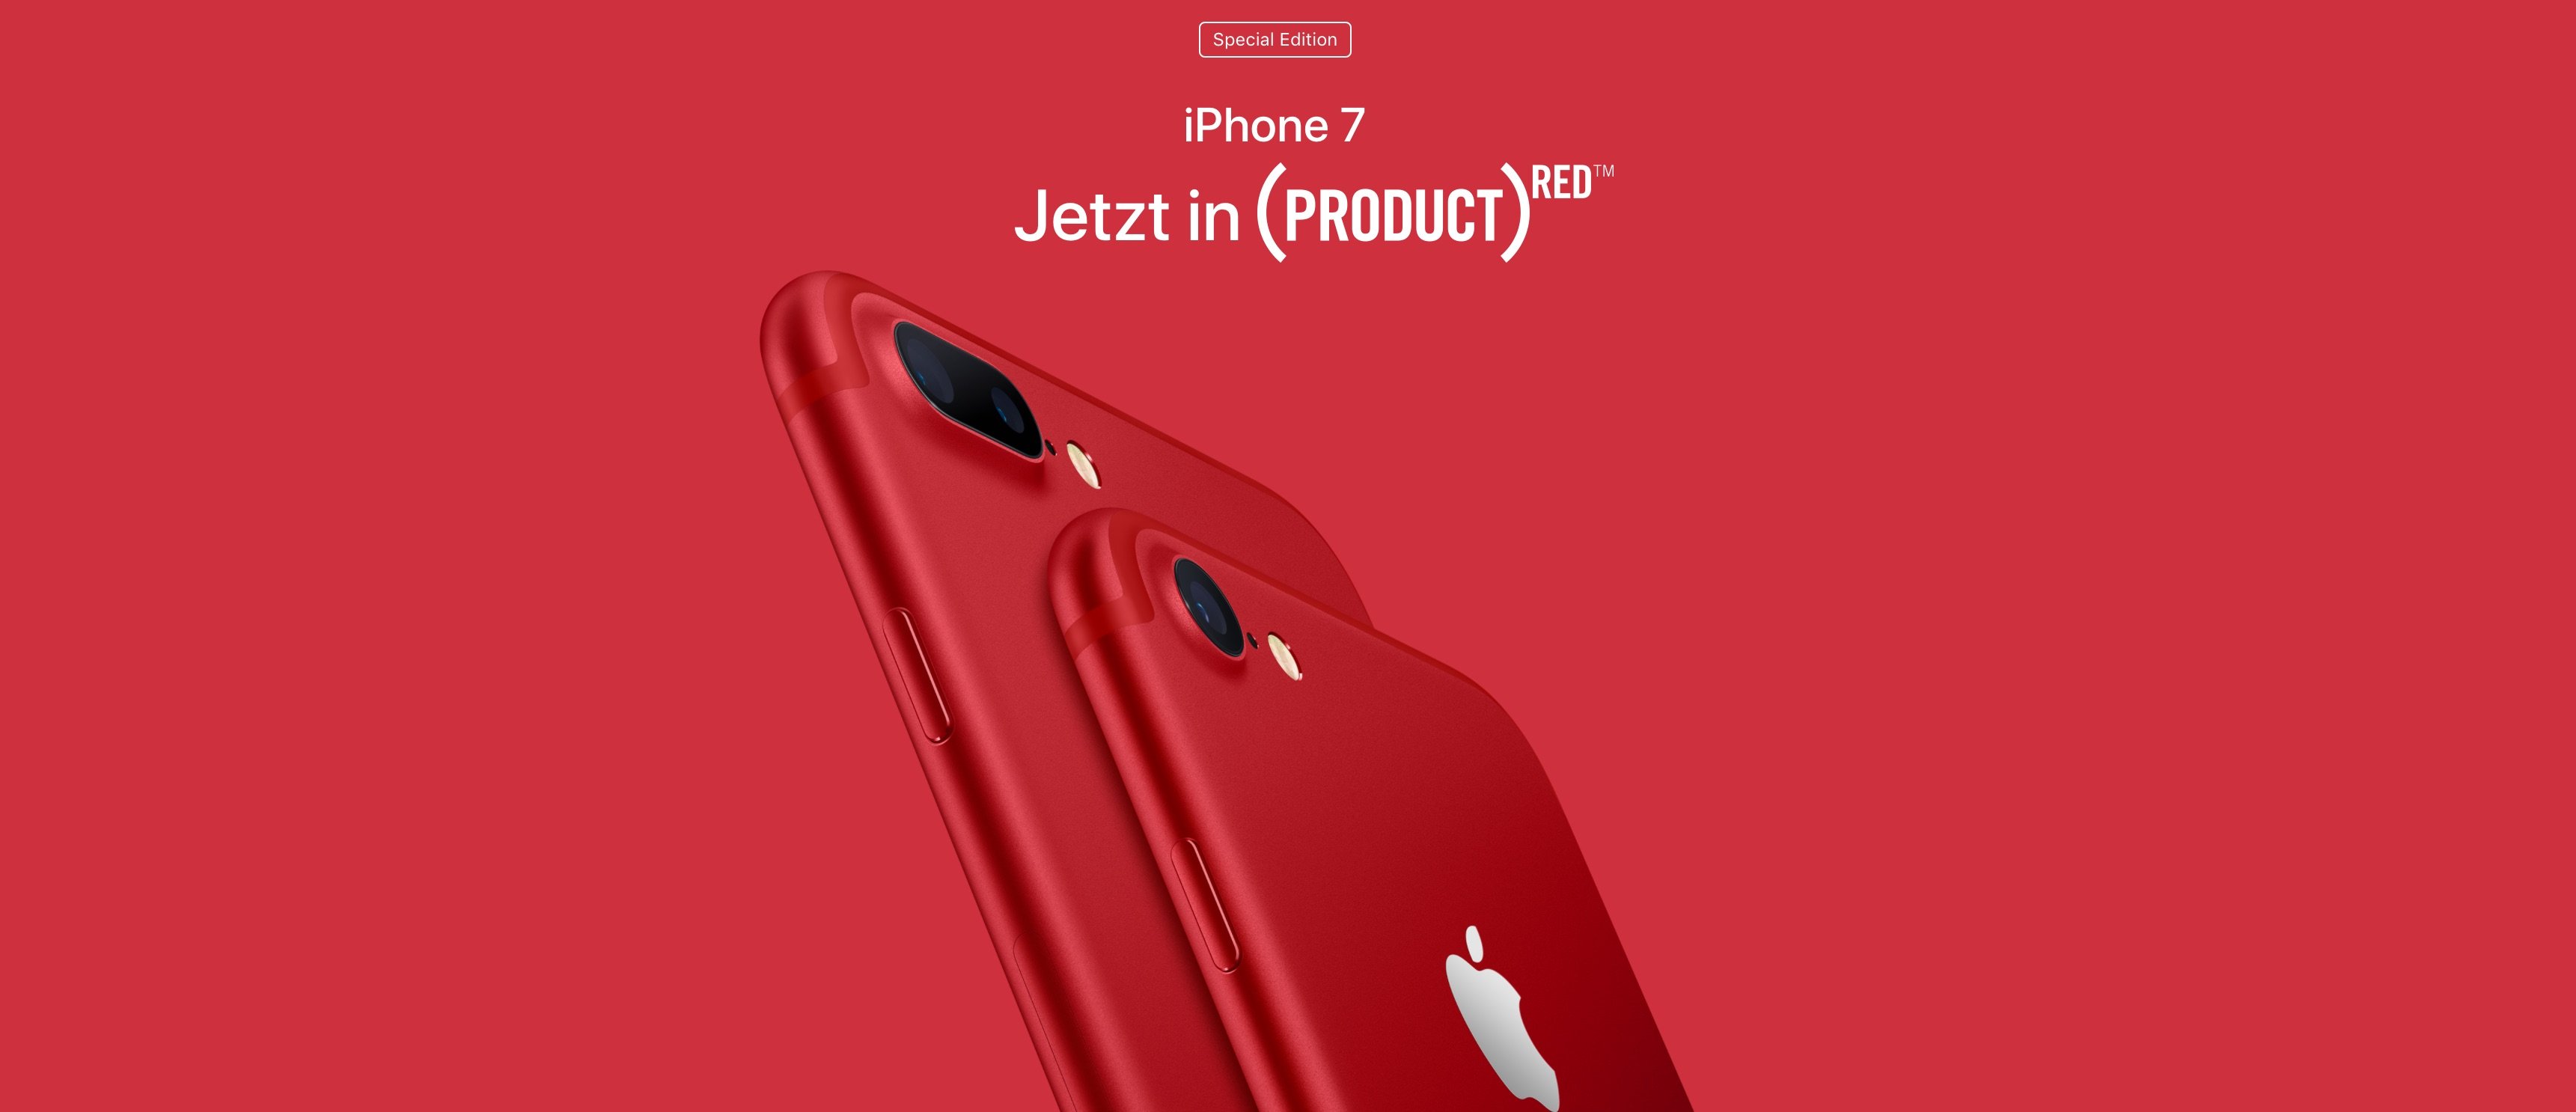 Apple iPhone 7 RED im Hands-on Video 9